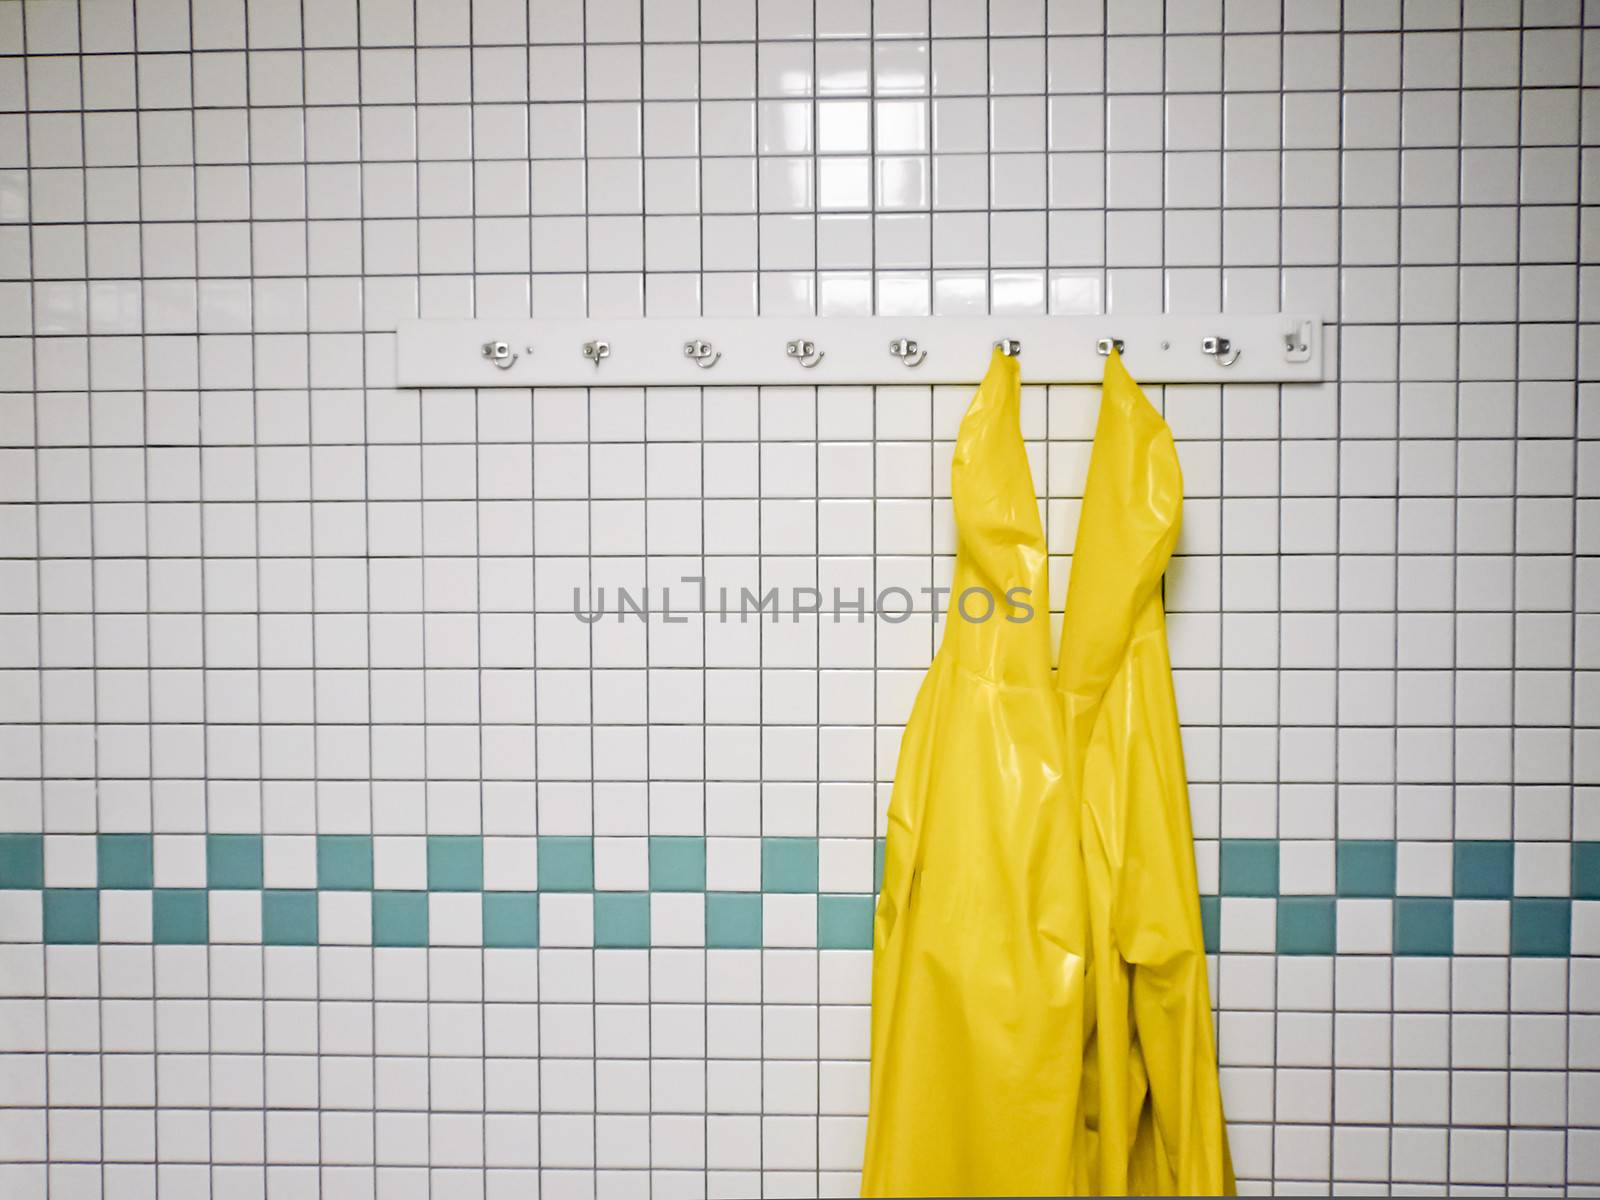 Two yellow work aprons hang in a tiled work room.